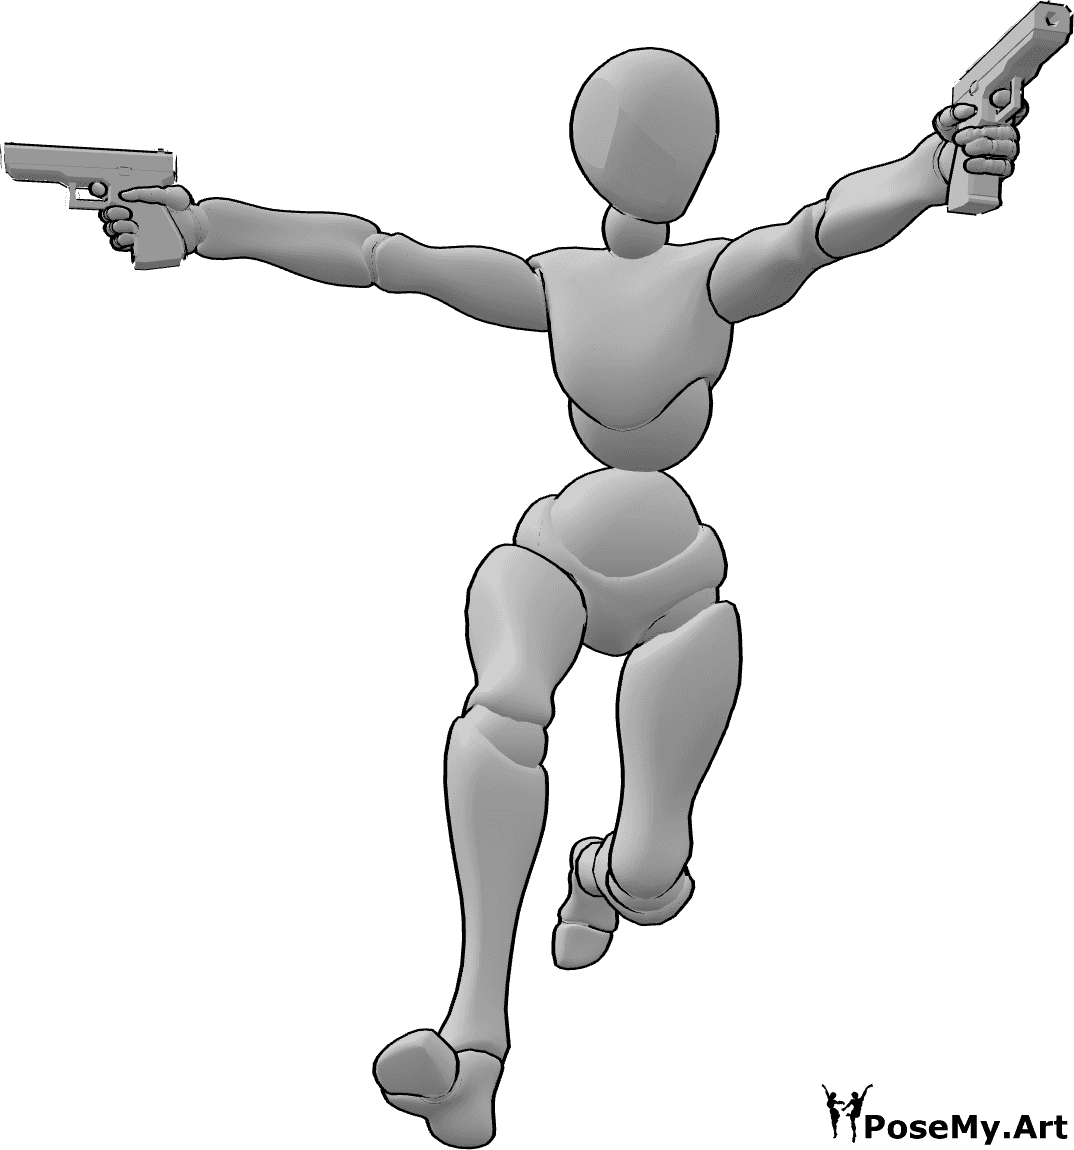 Pose Reference- Running two guns pose - Female is running, holding and aiming two guns in two directions